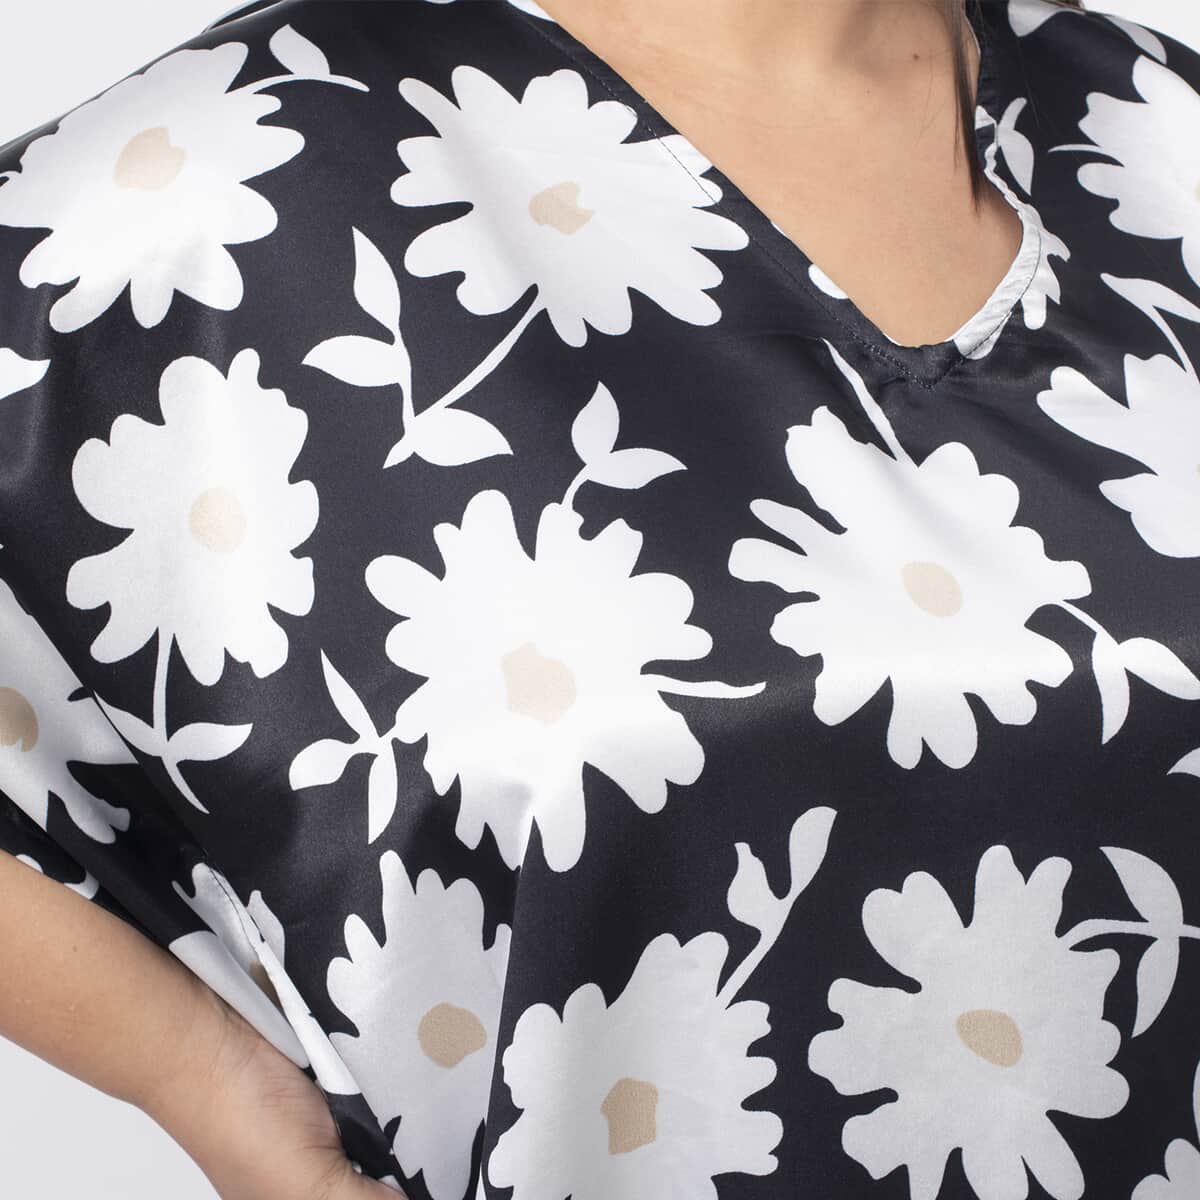 Tamsy Black and White Daisy Floral Printed Short Kaftan - One Size Fits Most image number 4